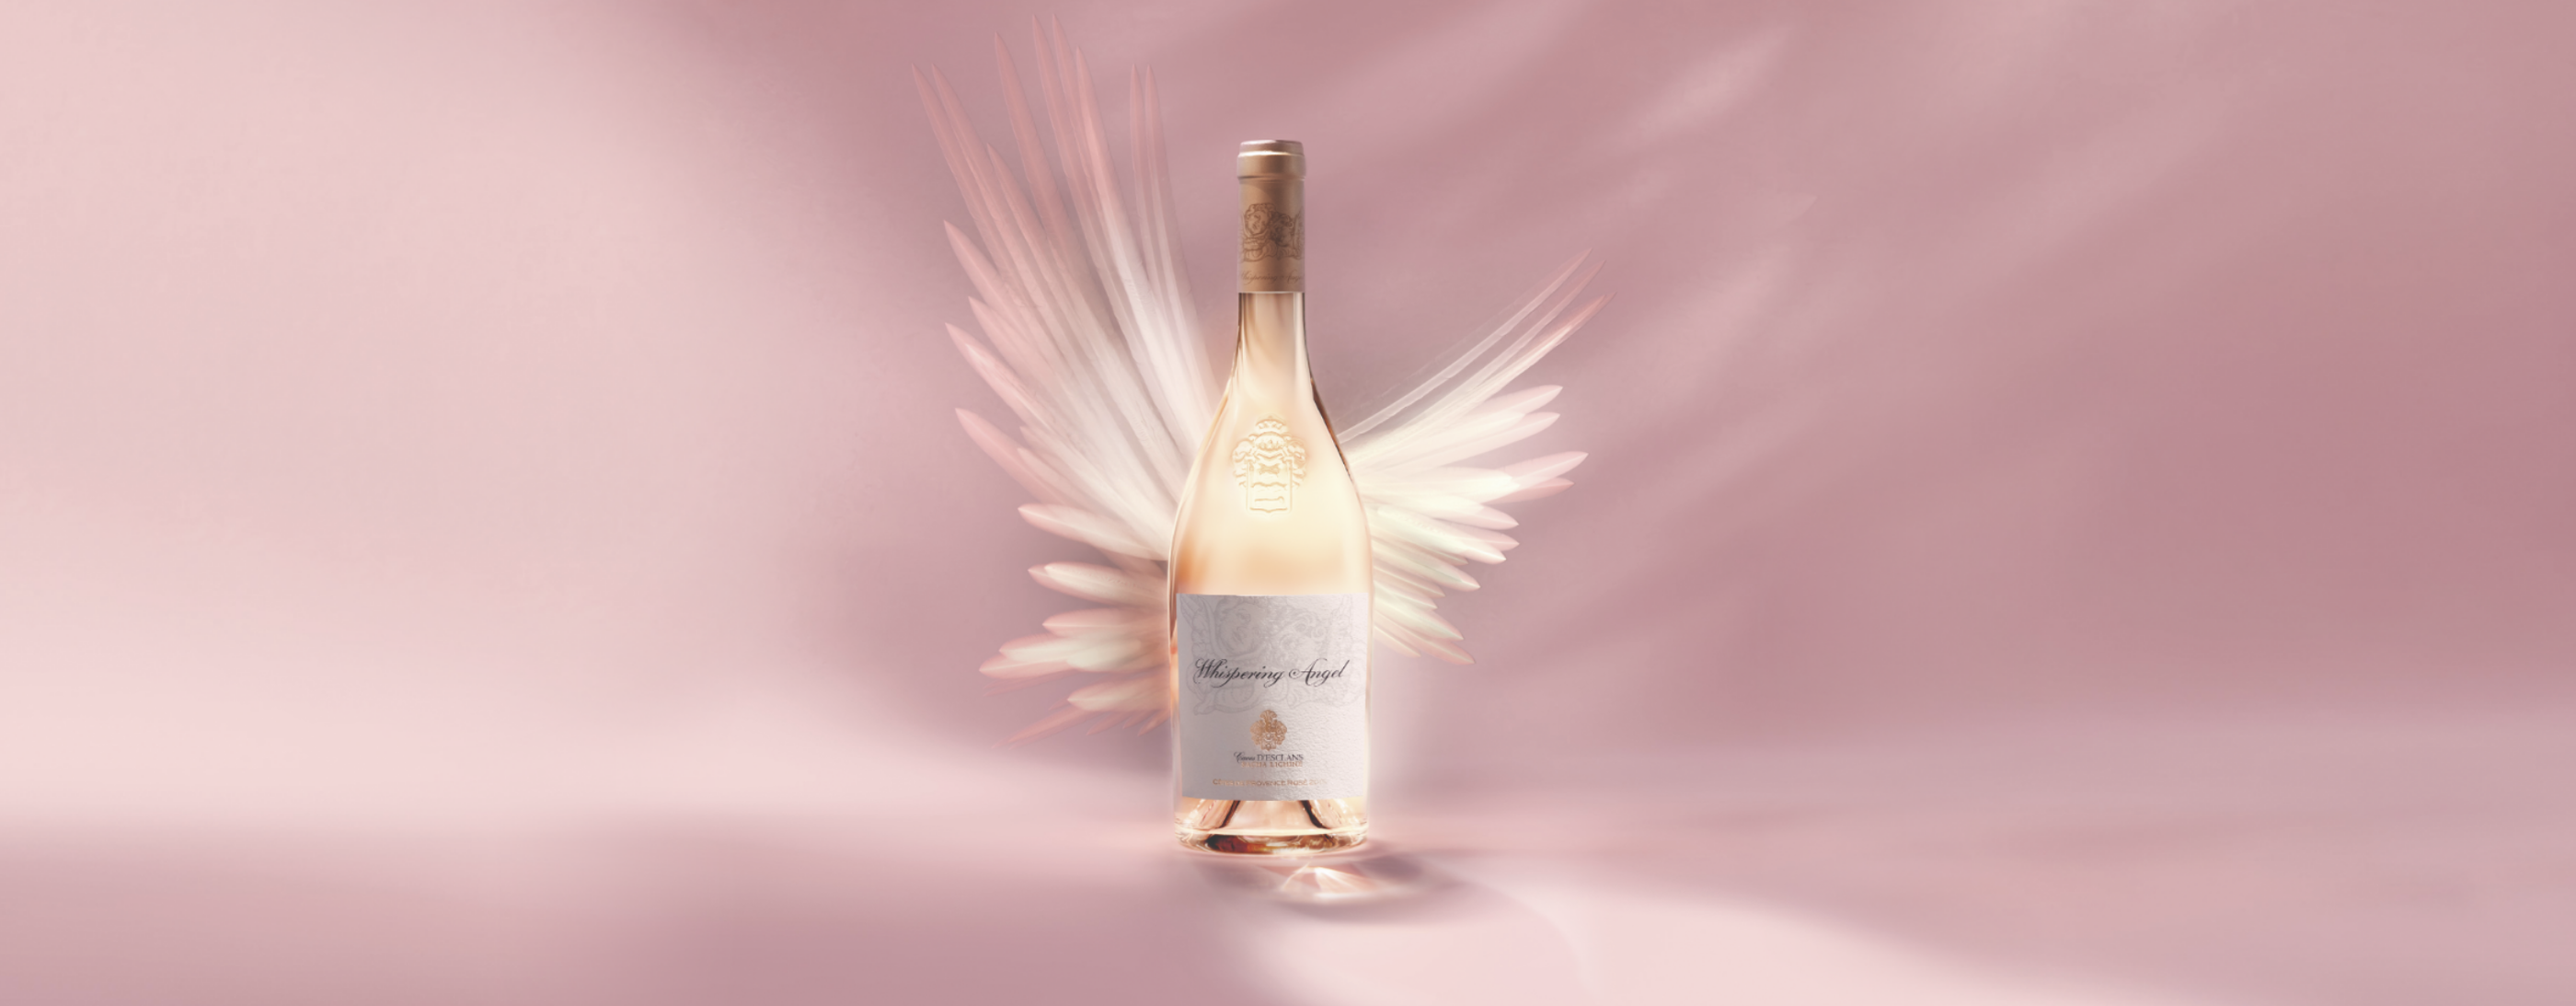 SAY “I LOVE YOU” WITH A SINGLE ROSÉ • GIFT WHISPERING ANGEL 